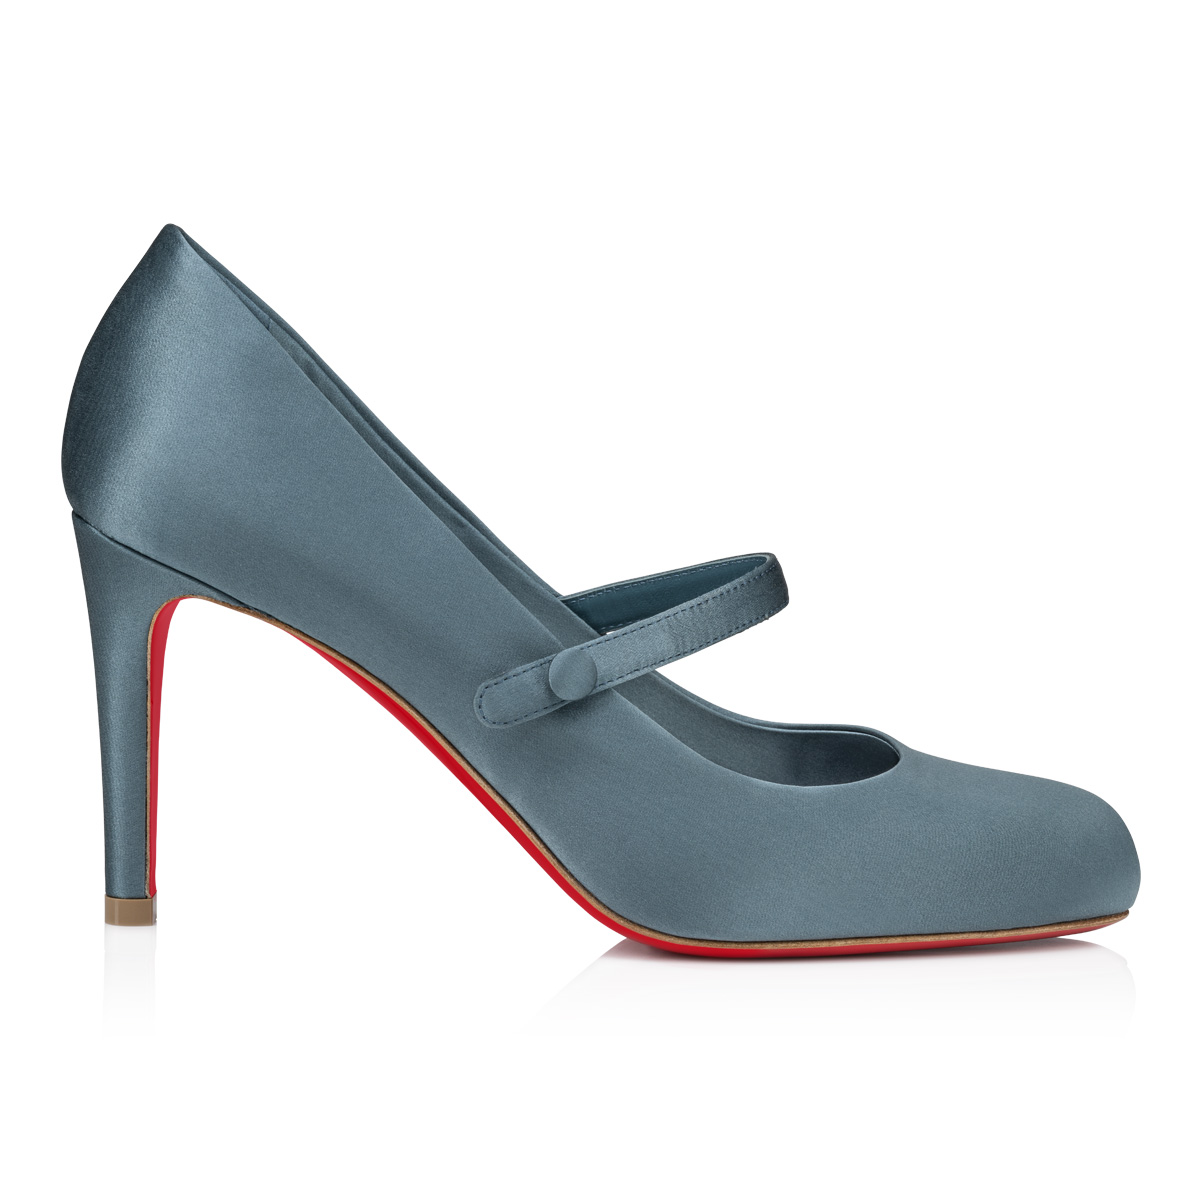 Christian Louboutin Pumppie Wallis Red Sole Crepe Satin Mary Jane Pumps